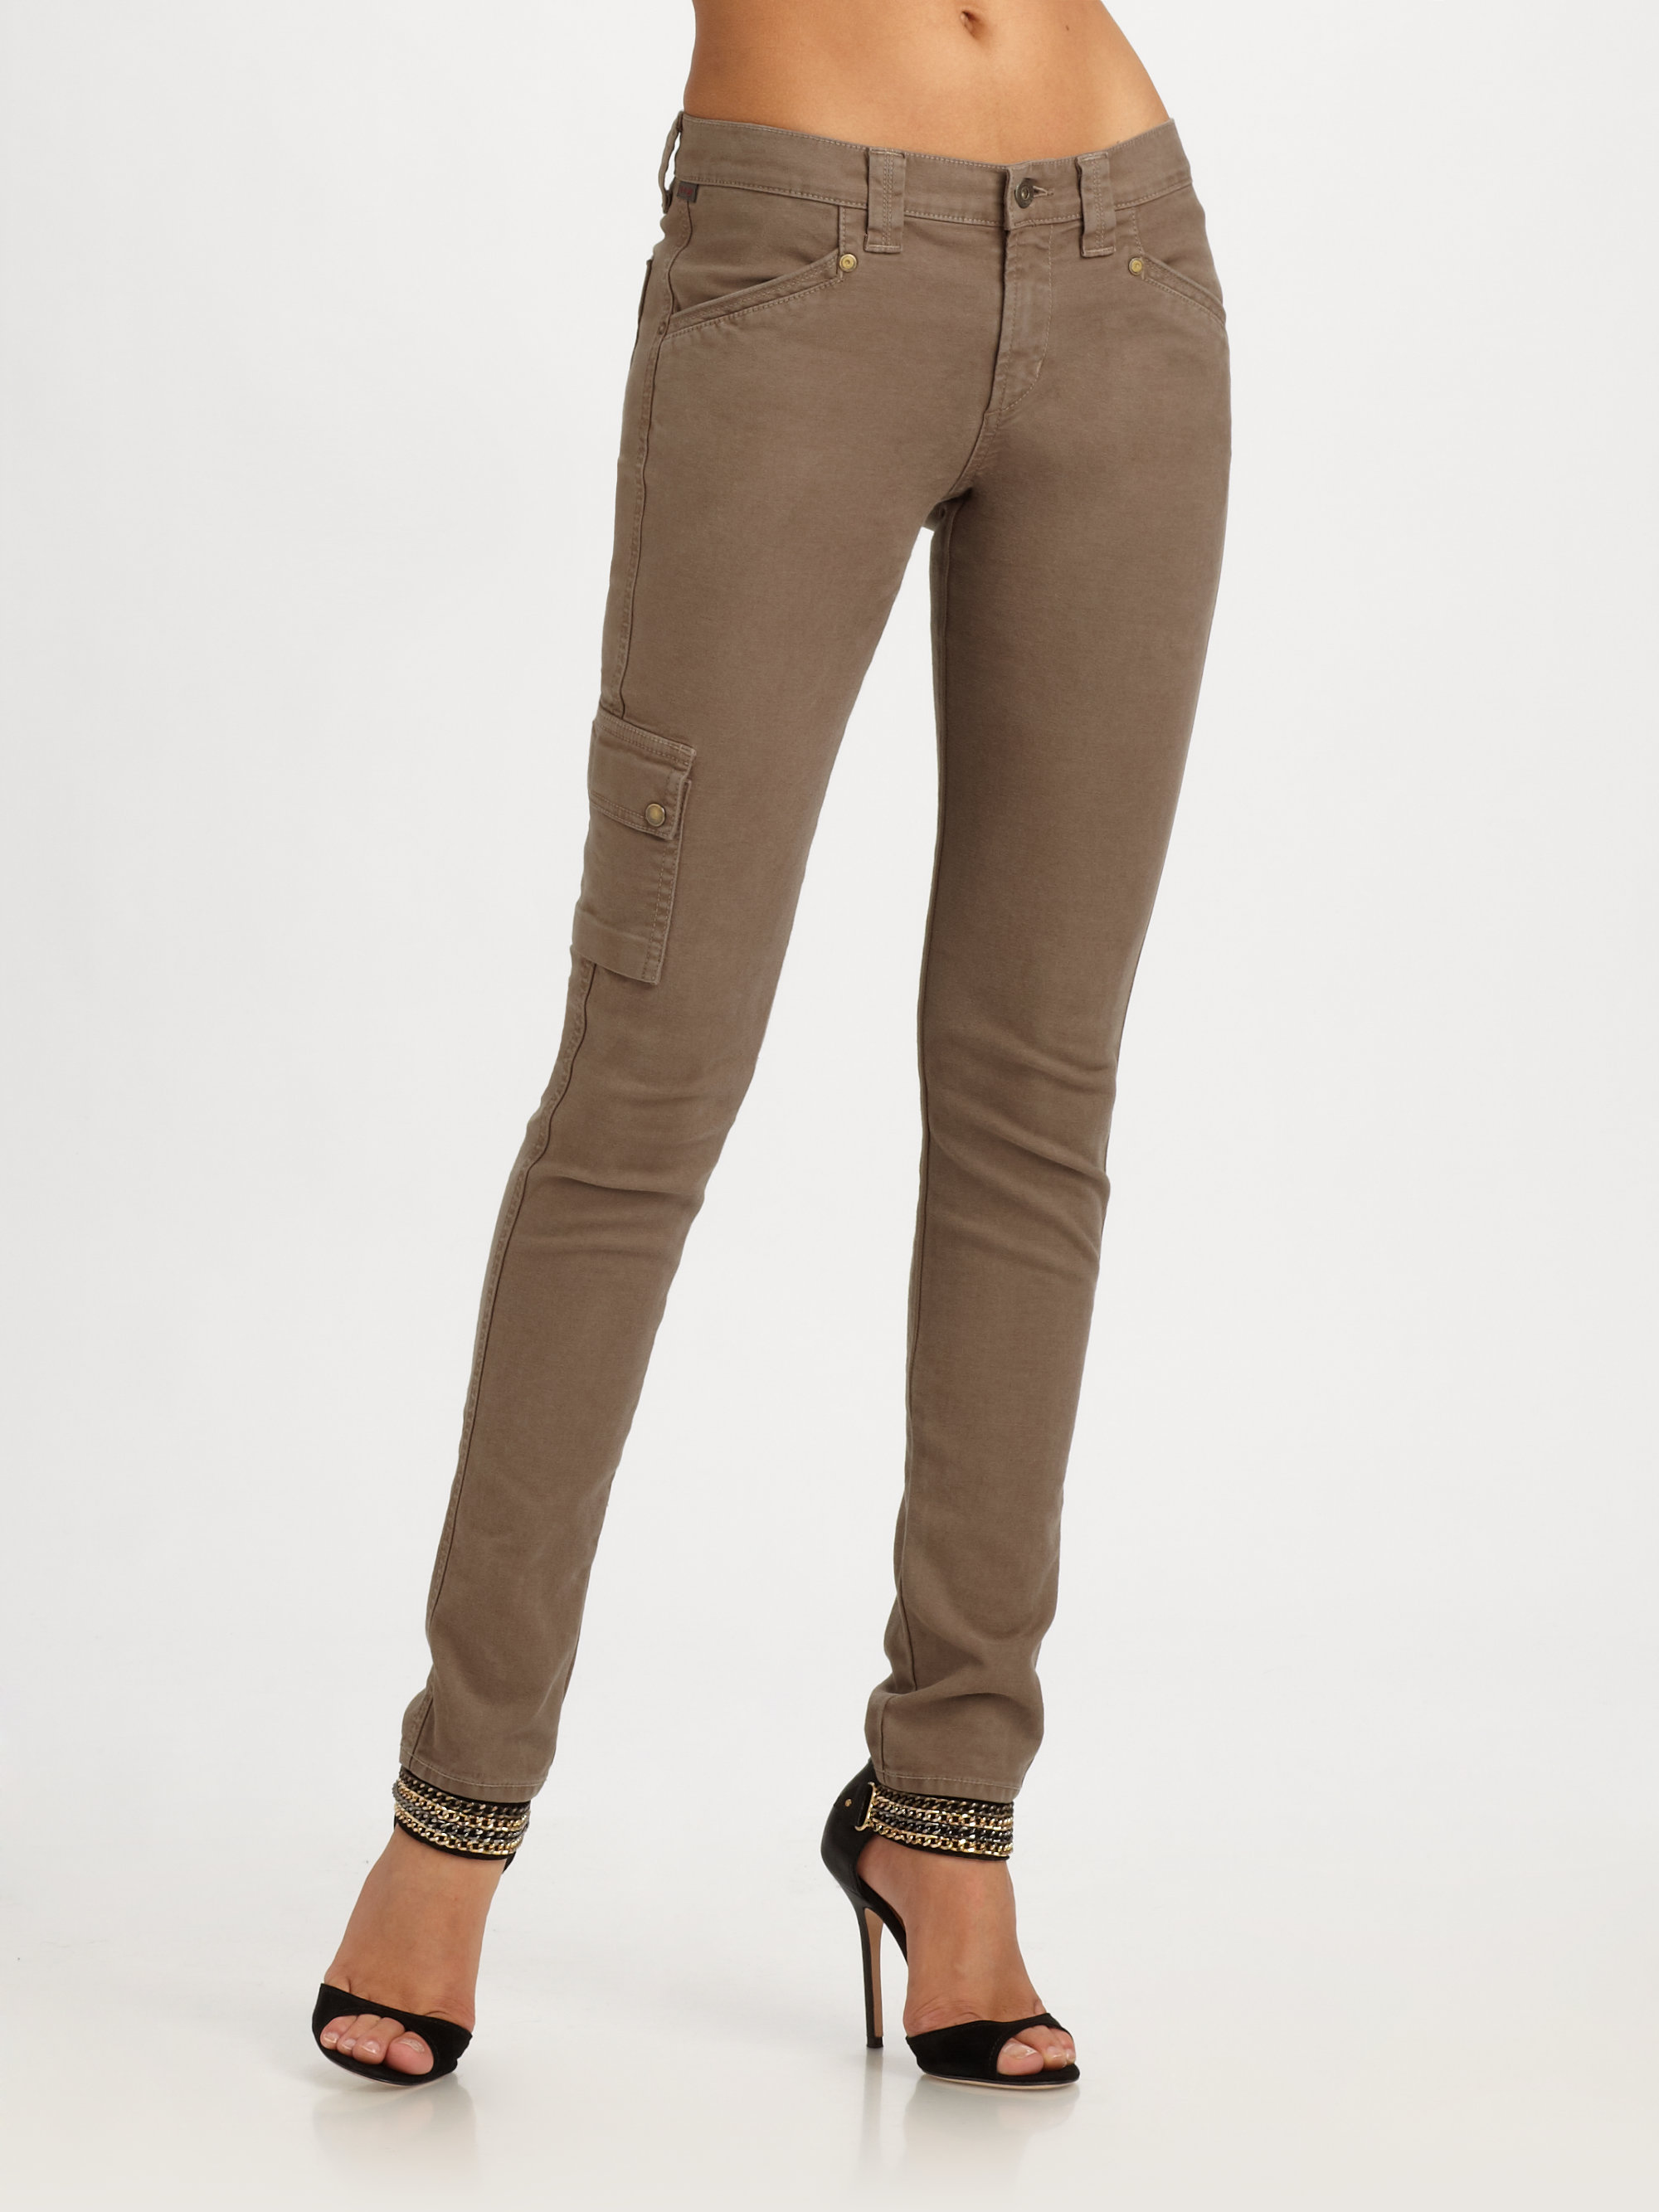 Lyst - Citizens of humanity Hope Skinny Cargo Pants in Green